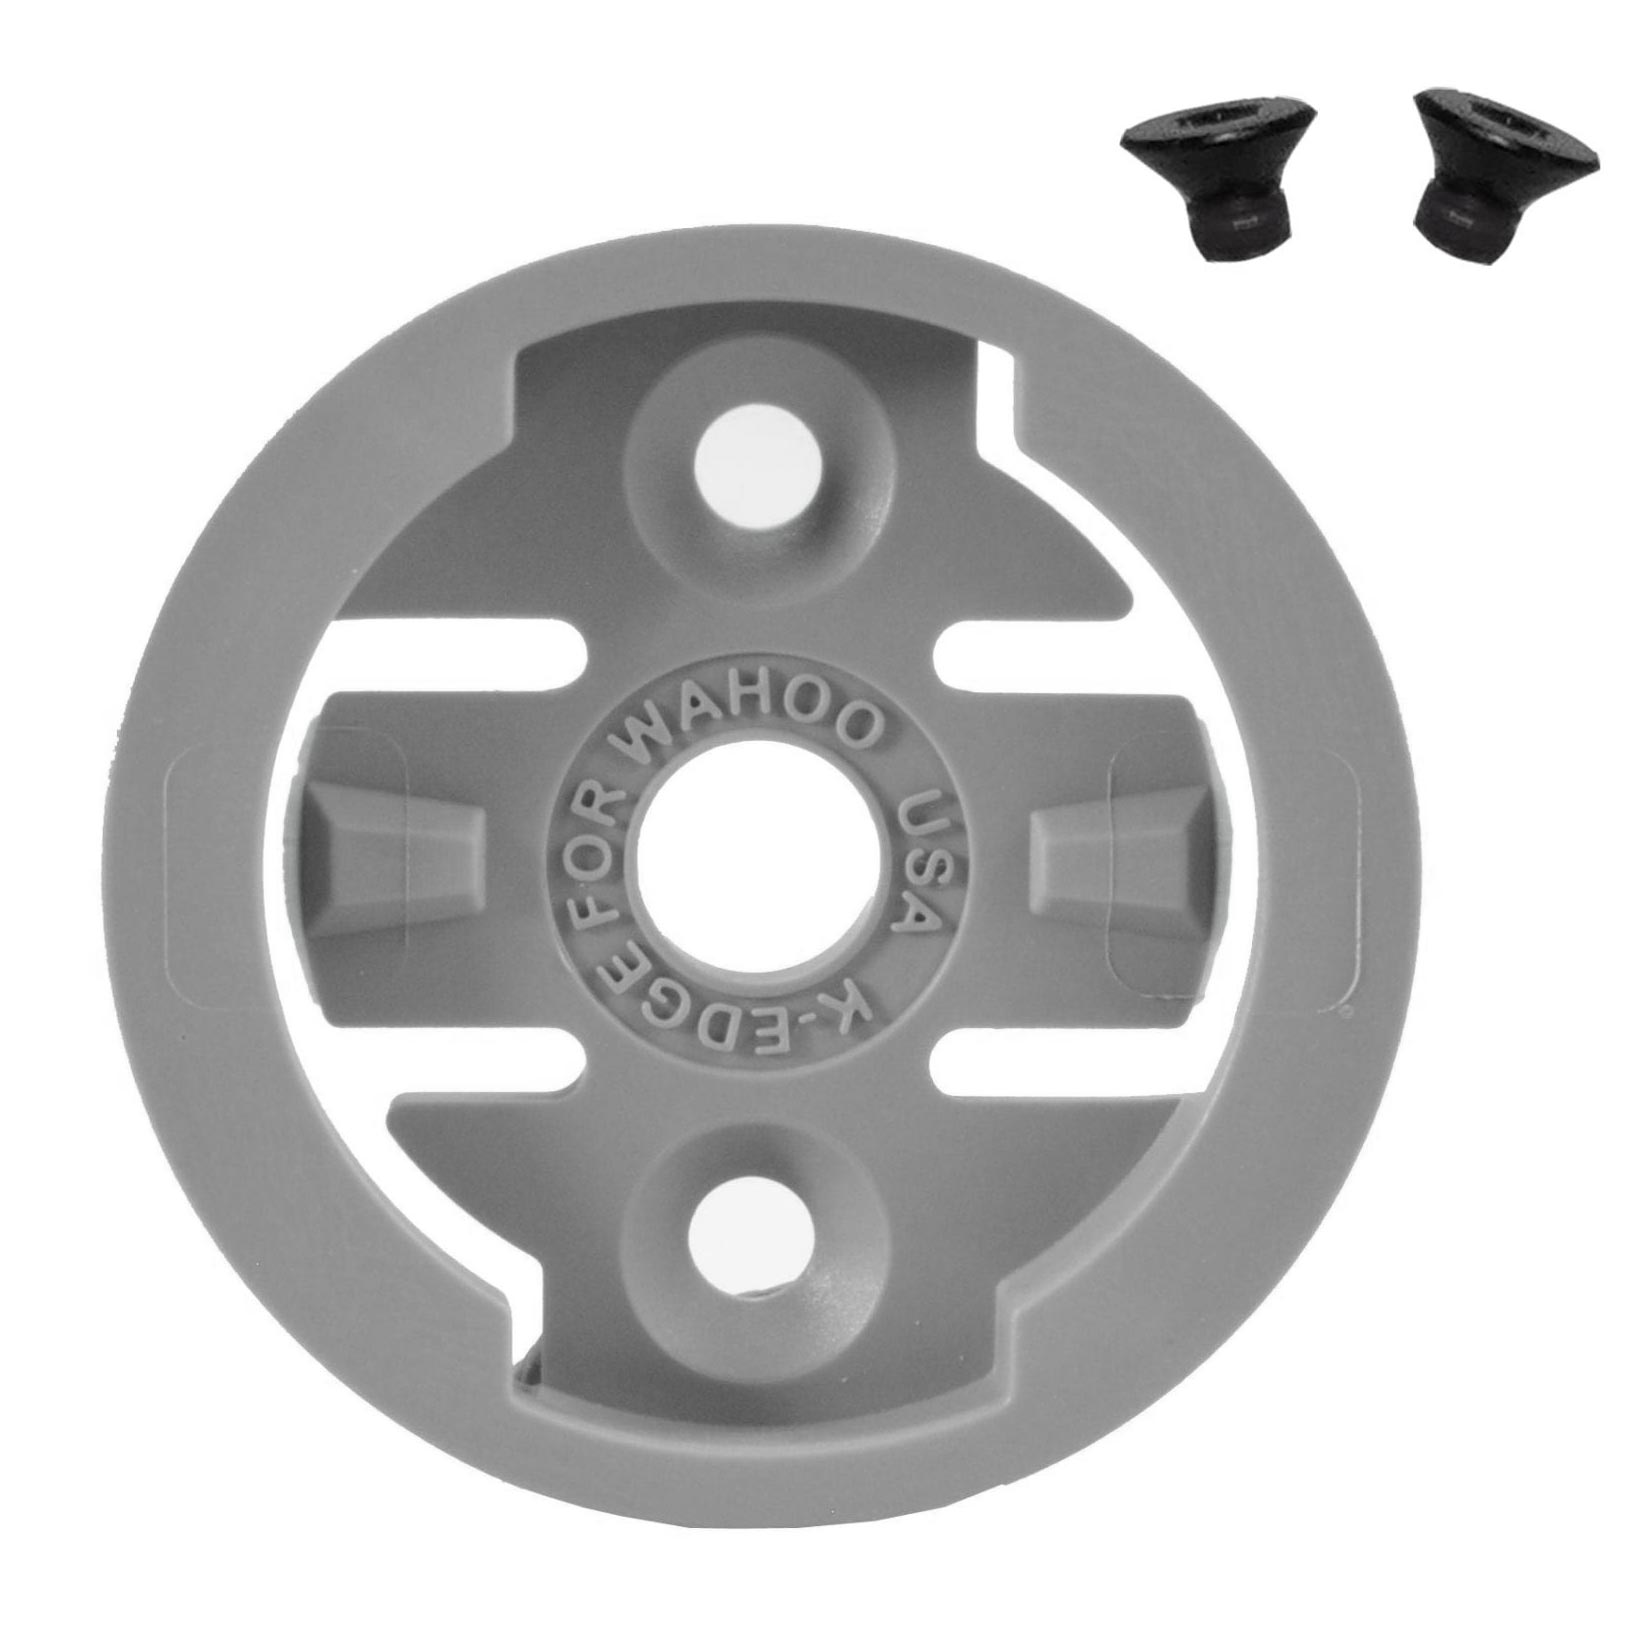 Picture of K-Edge Replacement Wahoo Insert Kit - grey